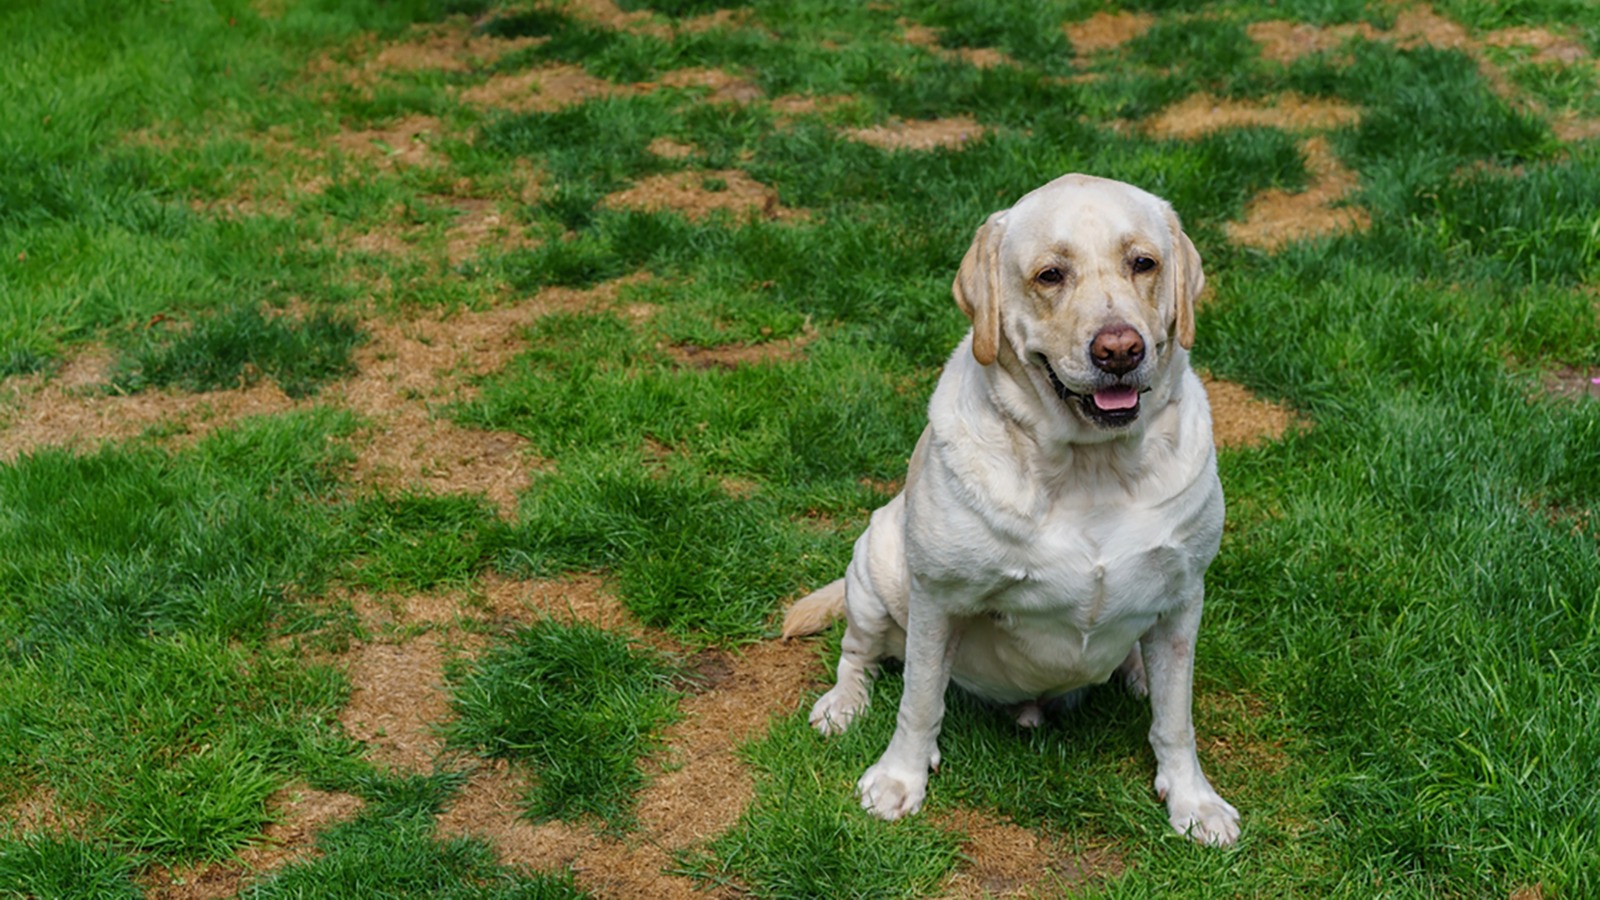 Things You Should Know About How To Fix Dog Urine Spots On Your Lawn